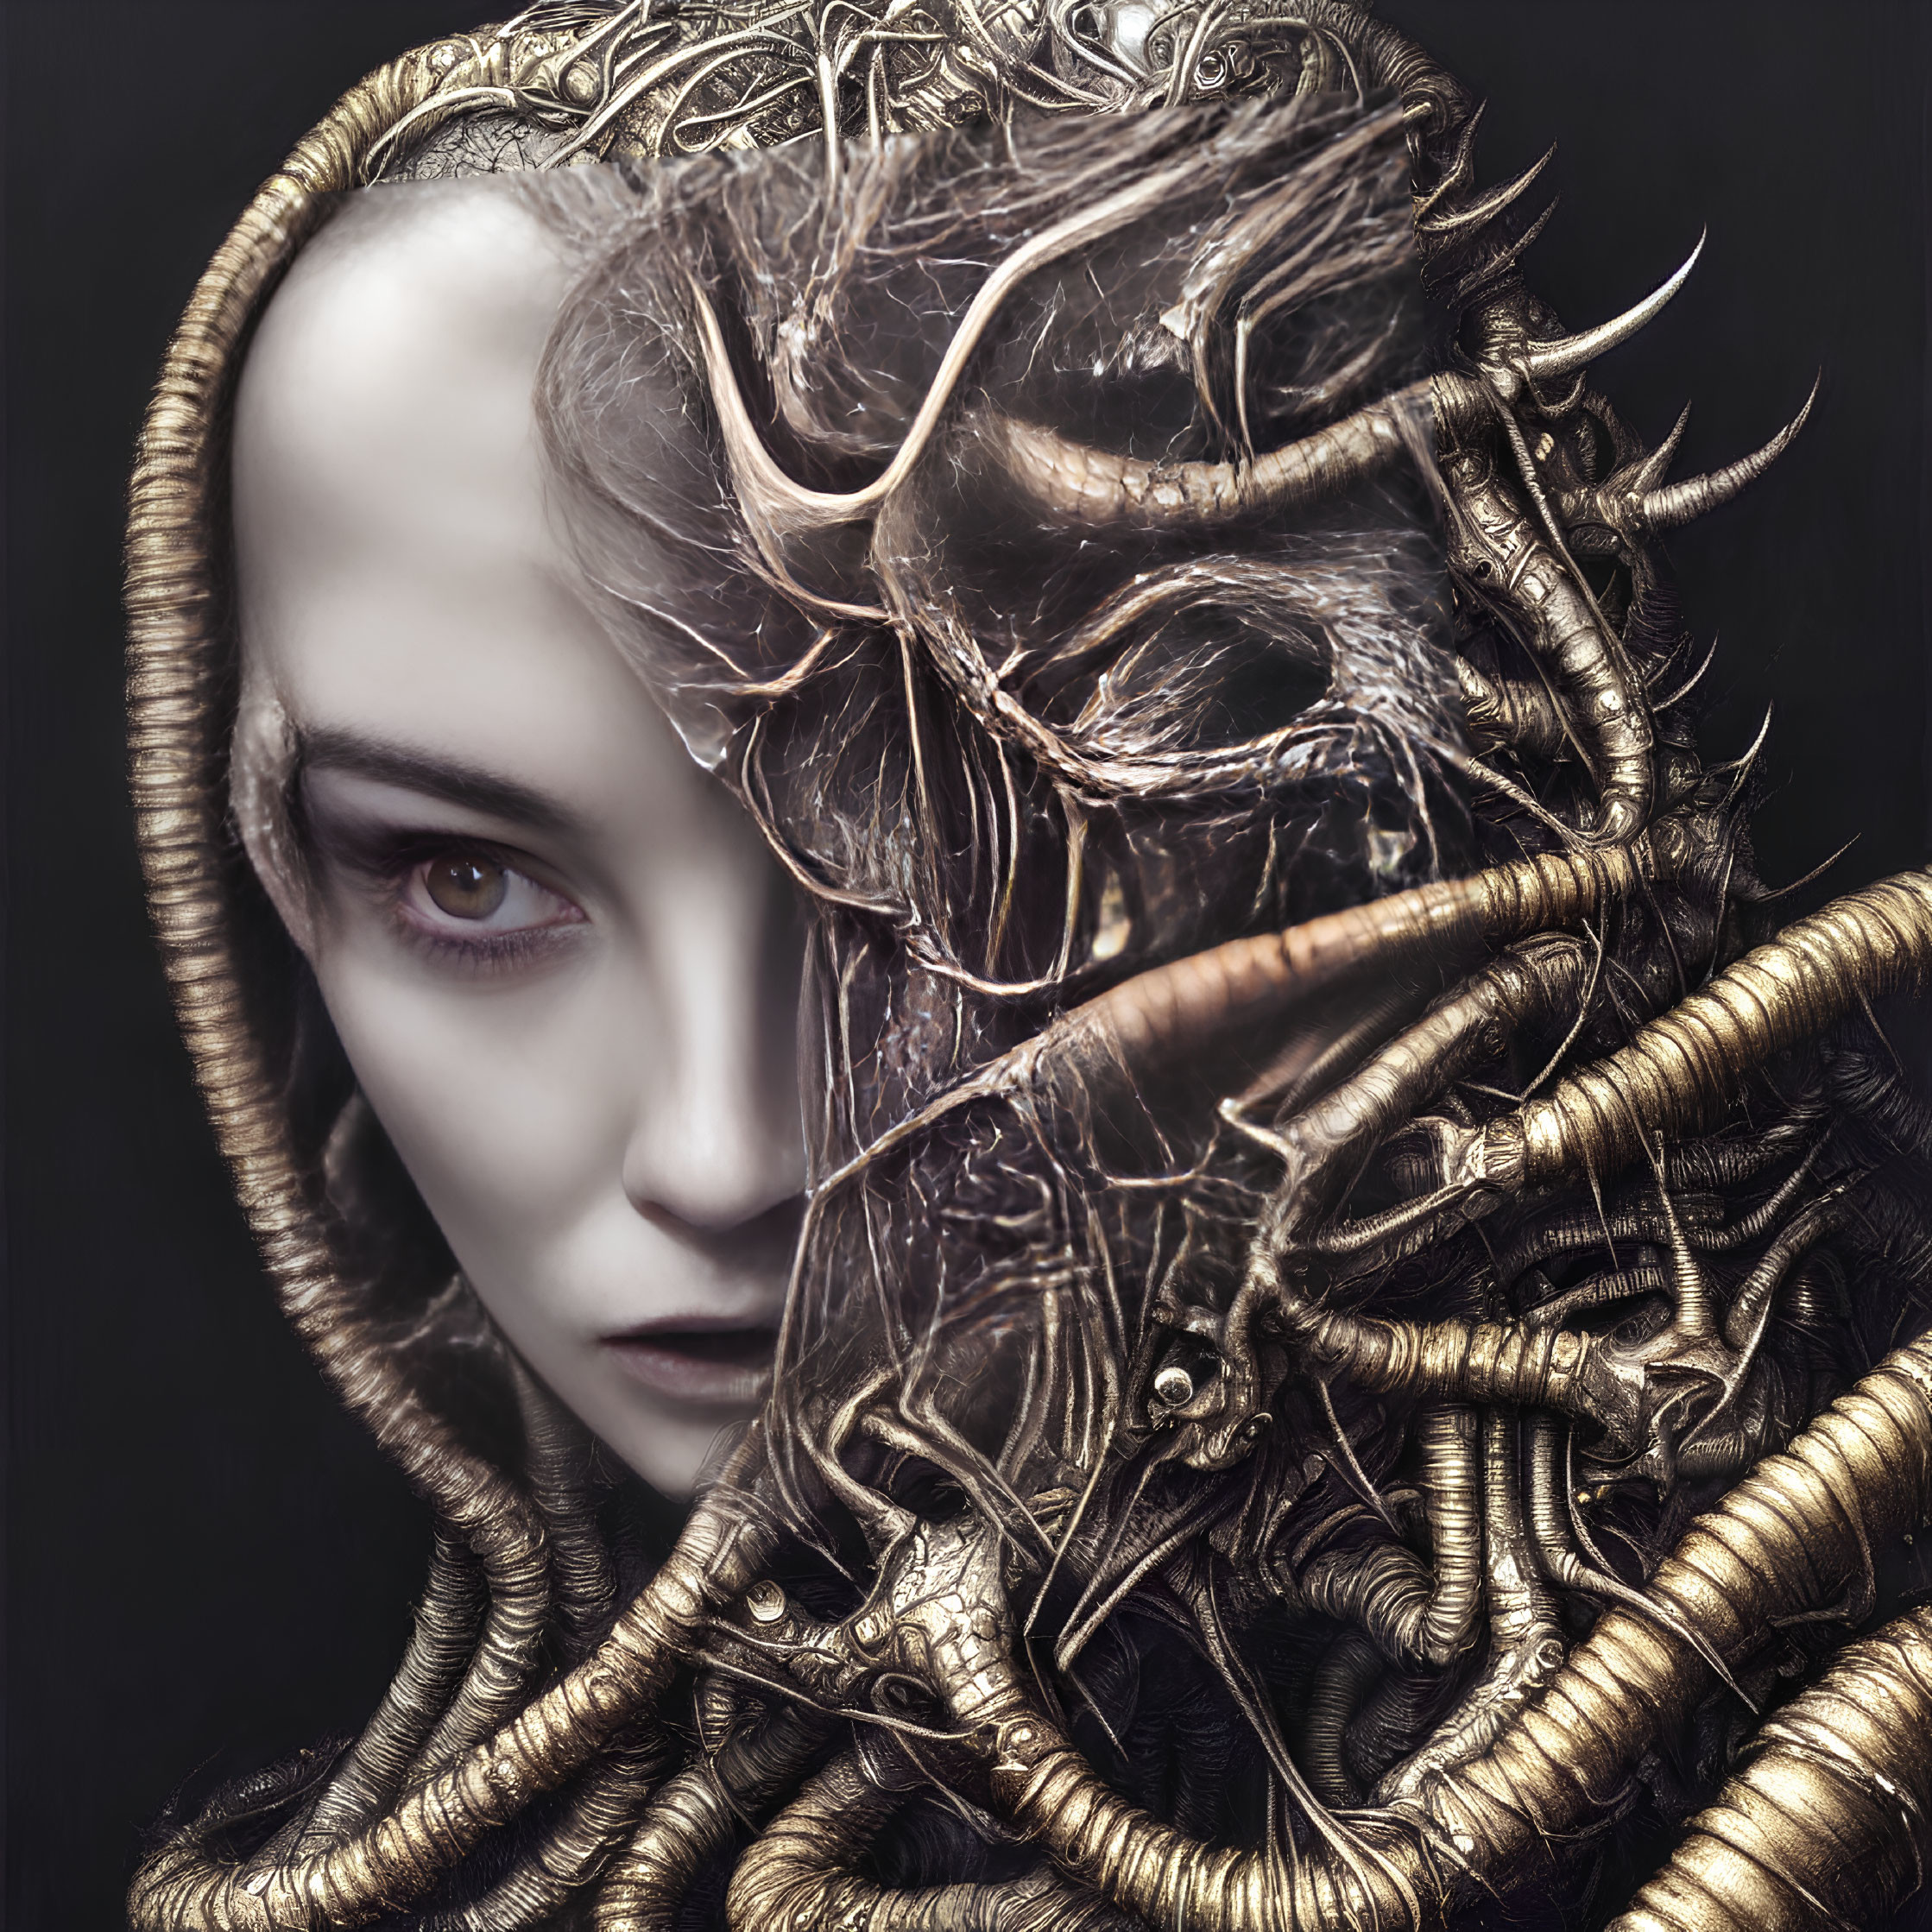 Surreal humanoid figure with pale skin and red eye in hood with metallic tendrils